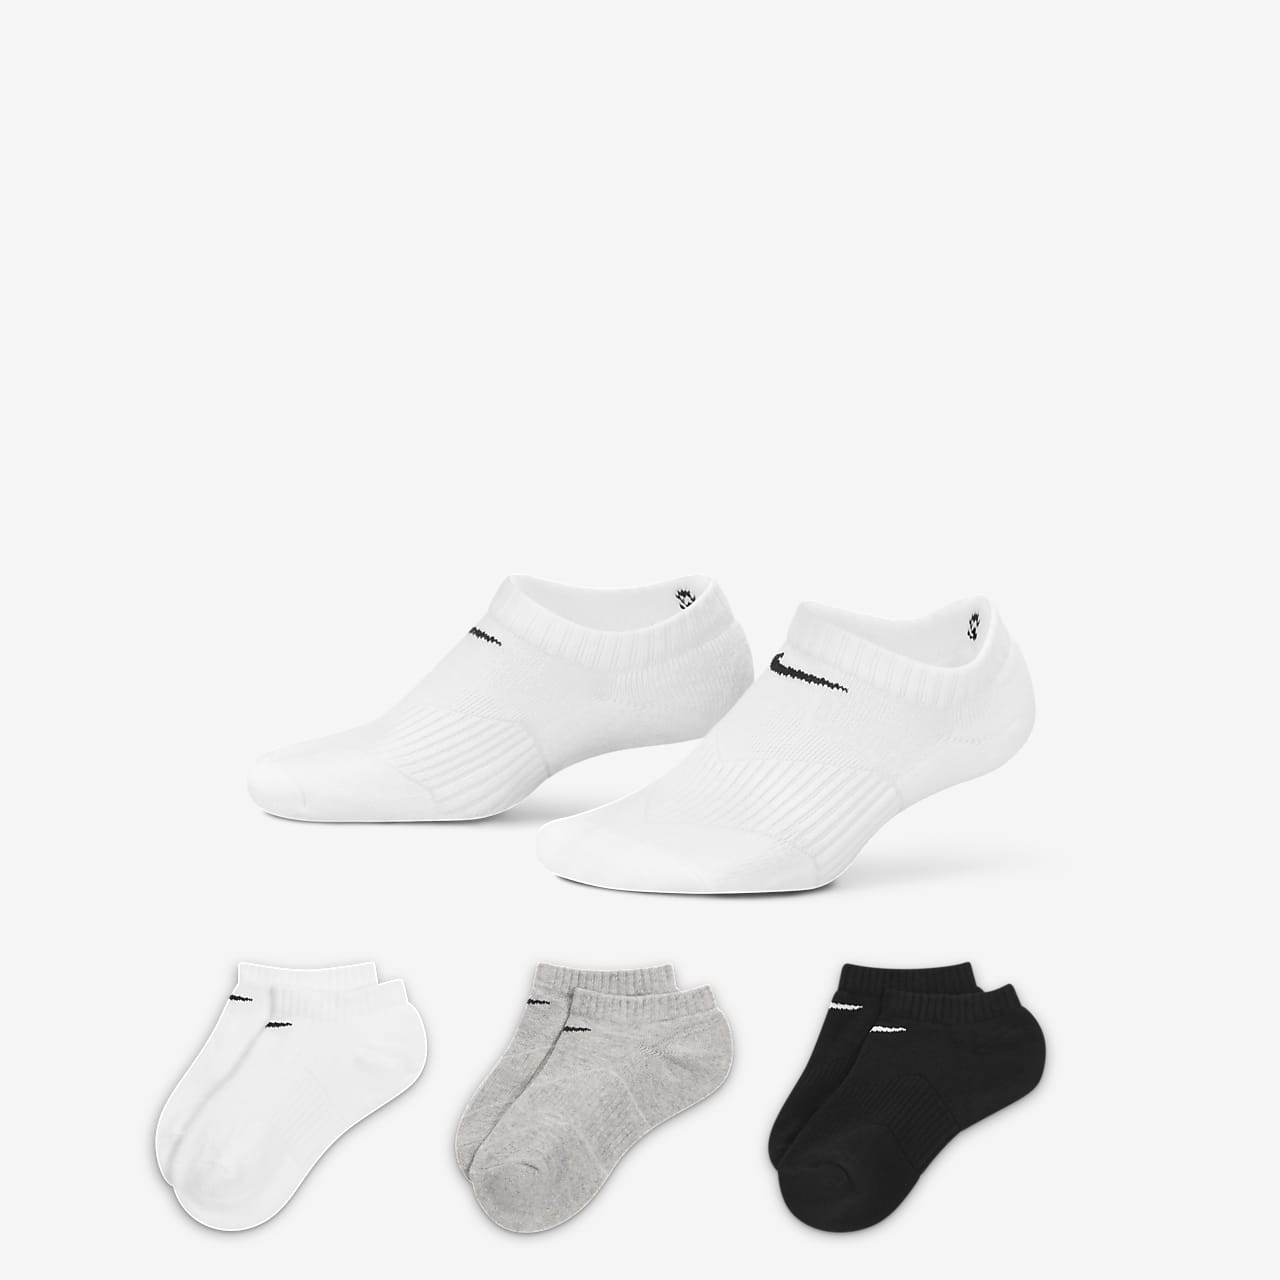 performance invisible socks 3 pairs